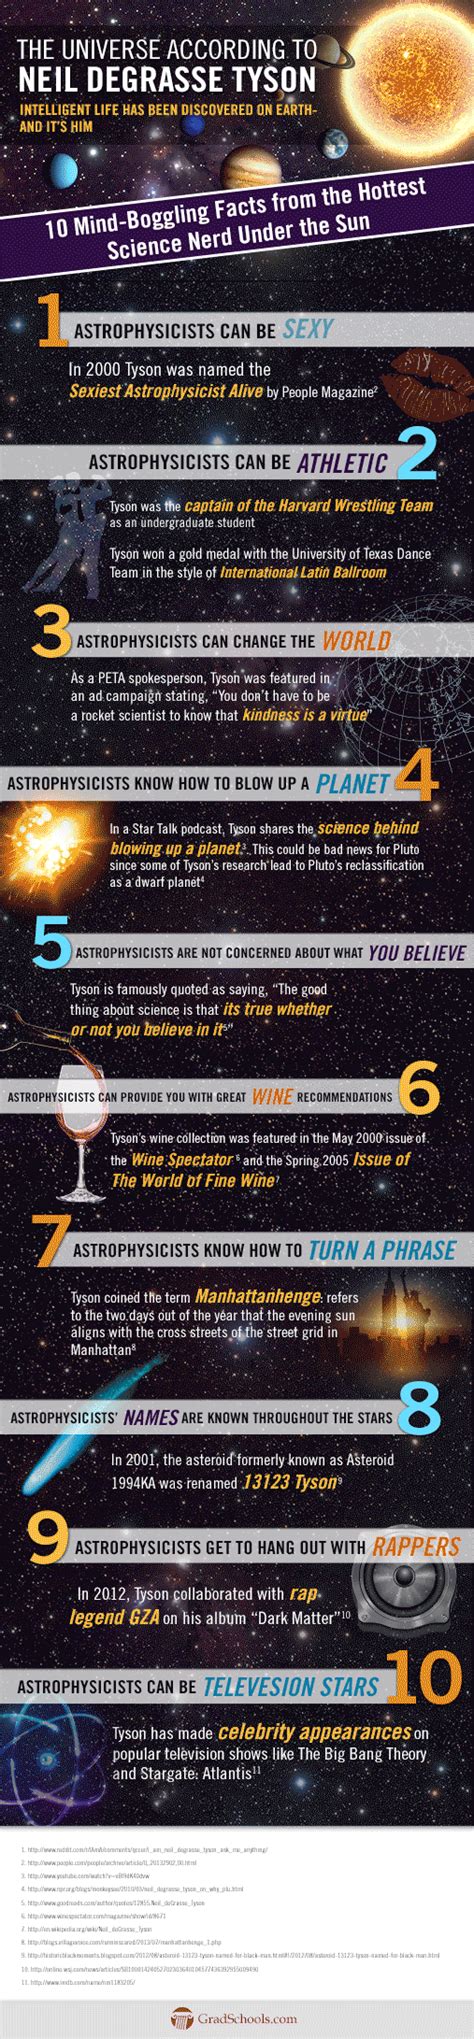 This is the best infographic about the coolest scientist on Earth. #Neil DeGrasse Tyson #science ...